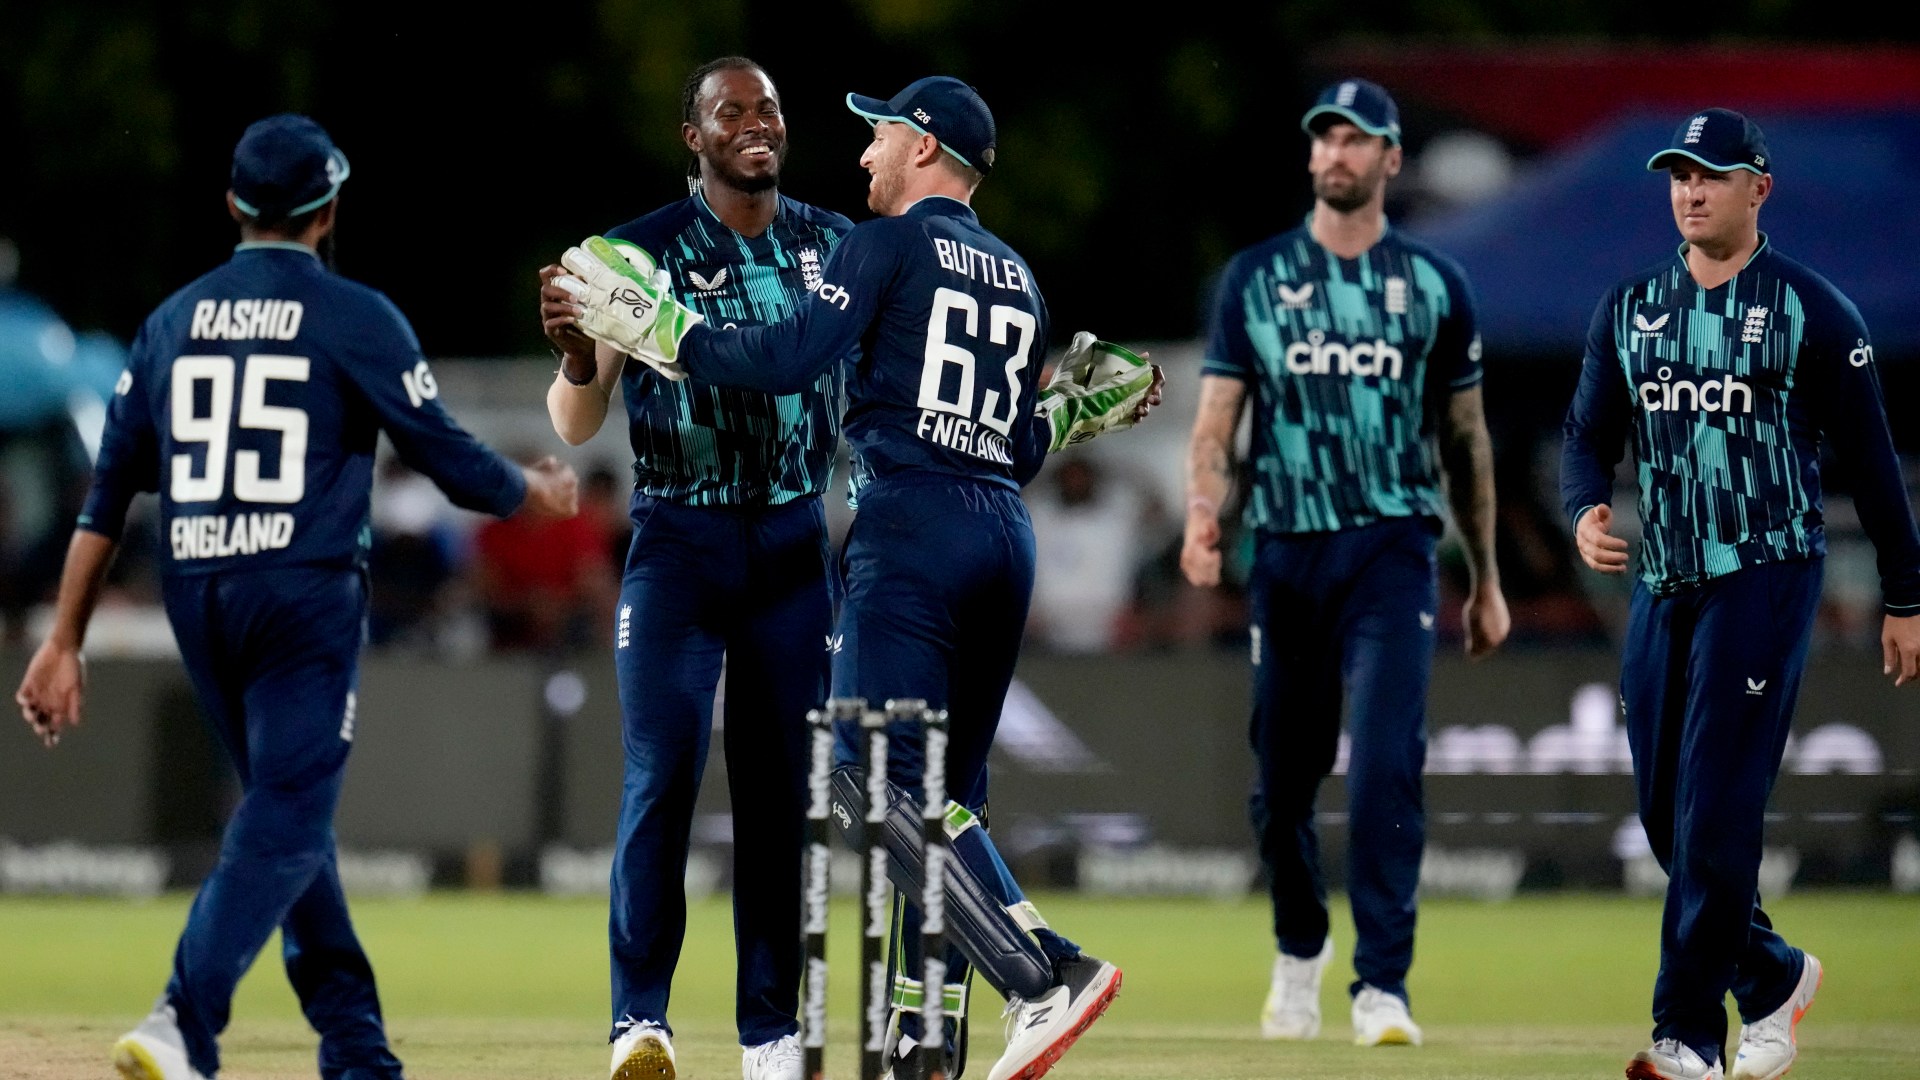 England Cricket World Cup winner, 29, could be forced to retire after three years without a first class match [Video]